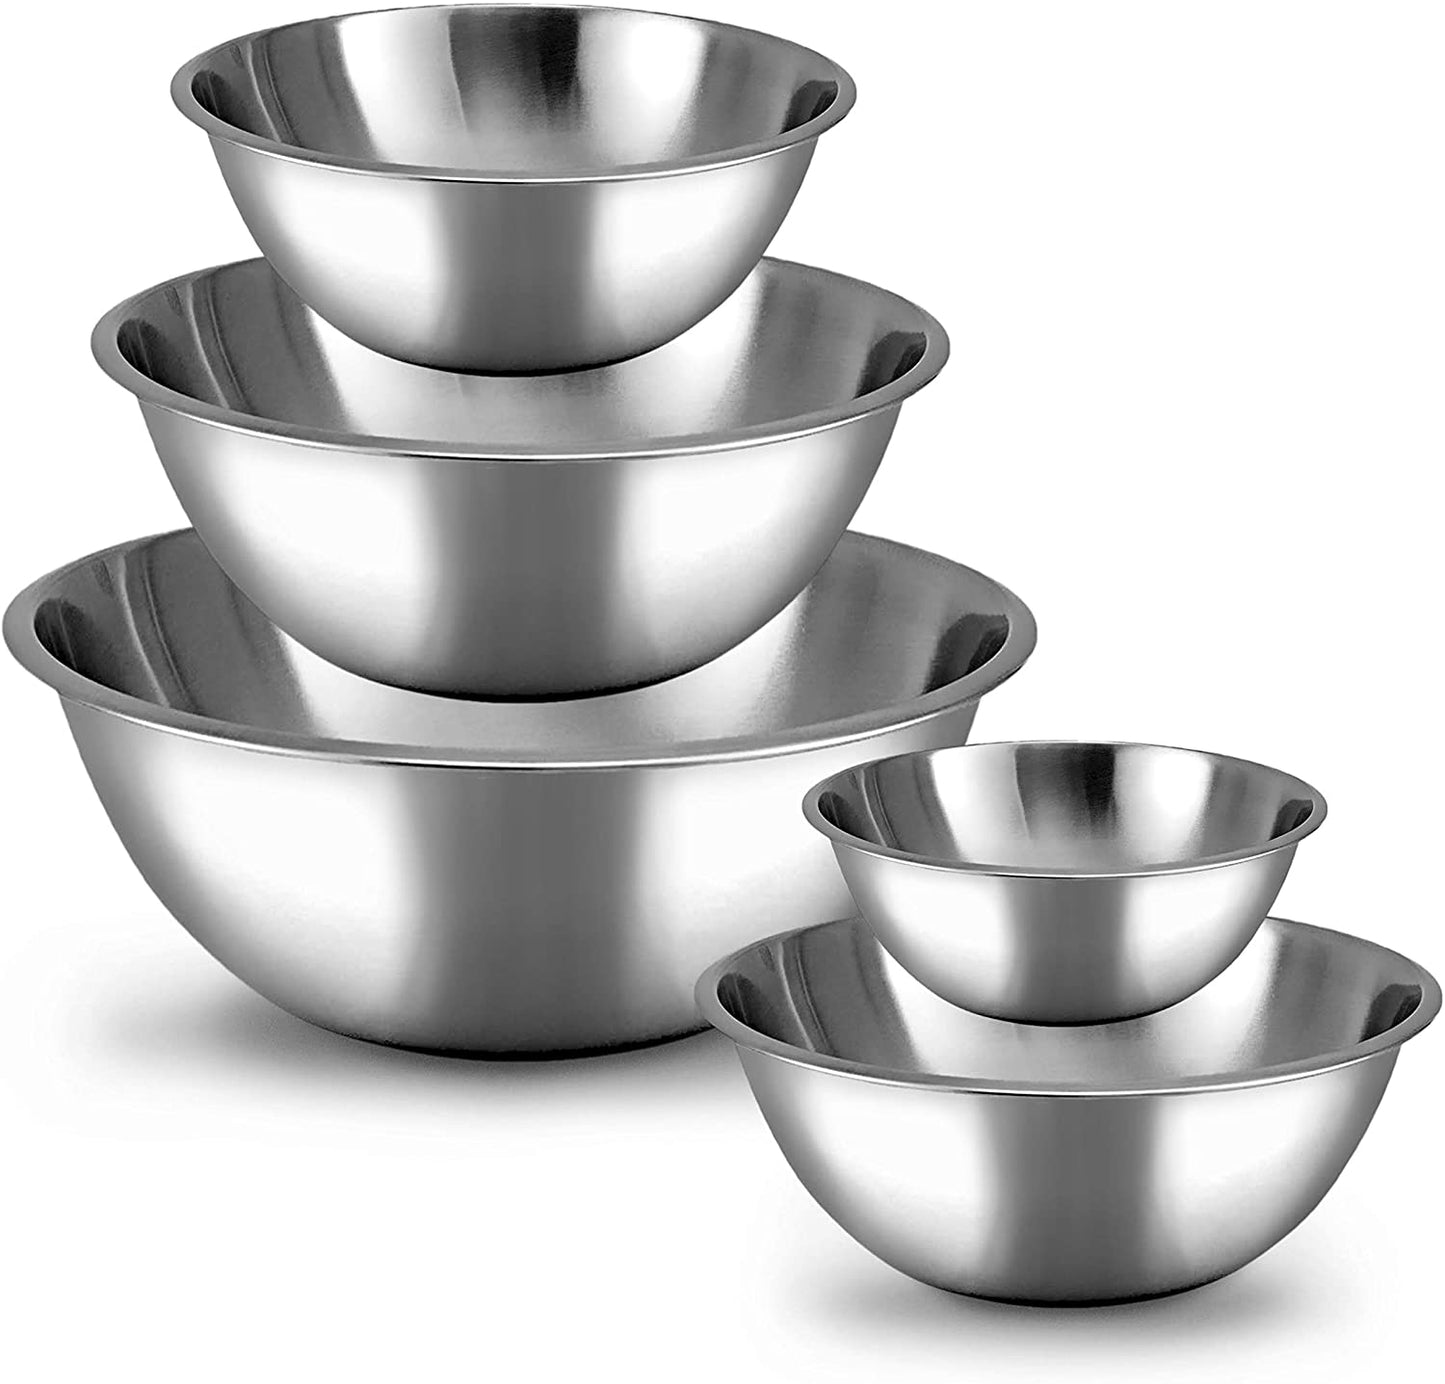 Heavy Duty Meal Prep Stainless Steel Mixing Bowls Set